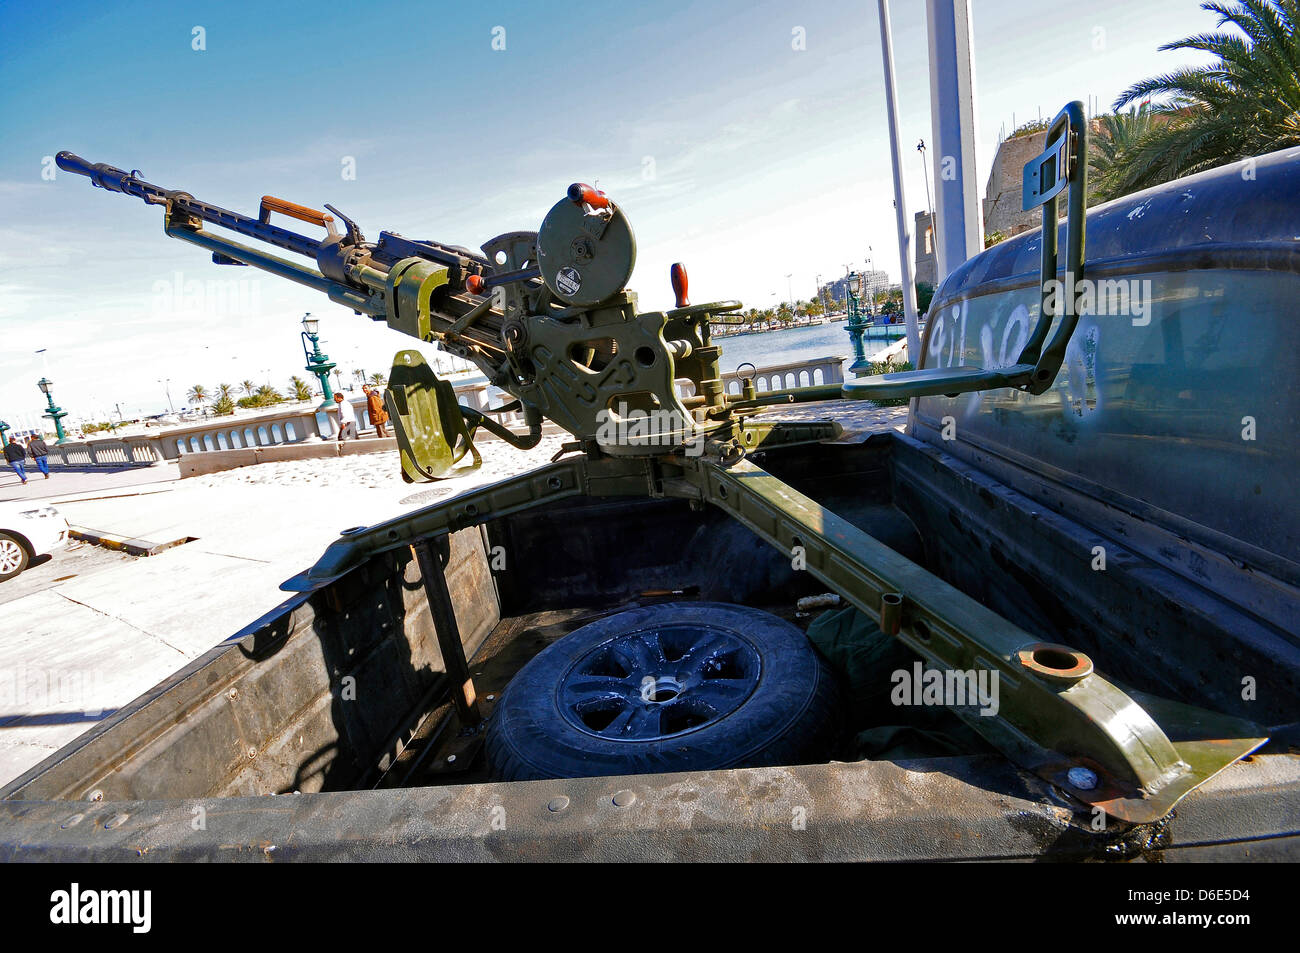 A Russian automatic 14.5 mm caliber gun is mounted to the back of a pick-up on a street in Tripoli, Libya, 17 December 2011. Numerous weapons and cannons mounted on the back of pick-ups and small trucks were used by Libyan rebels as makeshift armoured mobile units in the fight against the Gaddafi regime during the Libyan civil war in 2011. Photo: Matthias Toedt Stock Photo